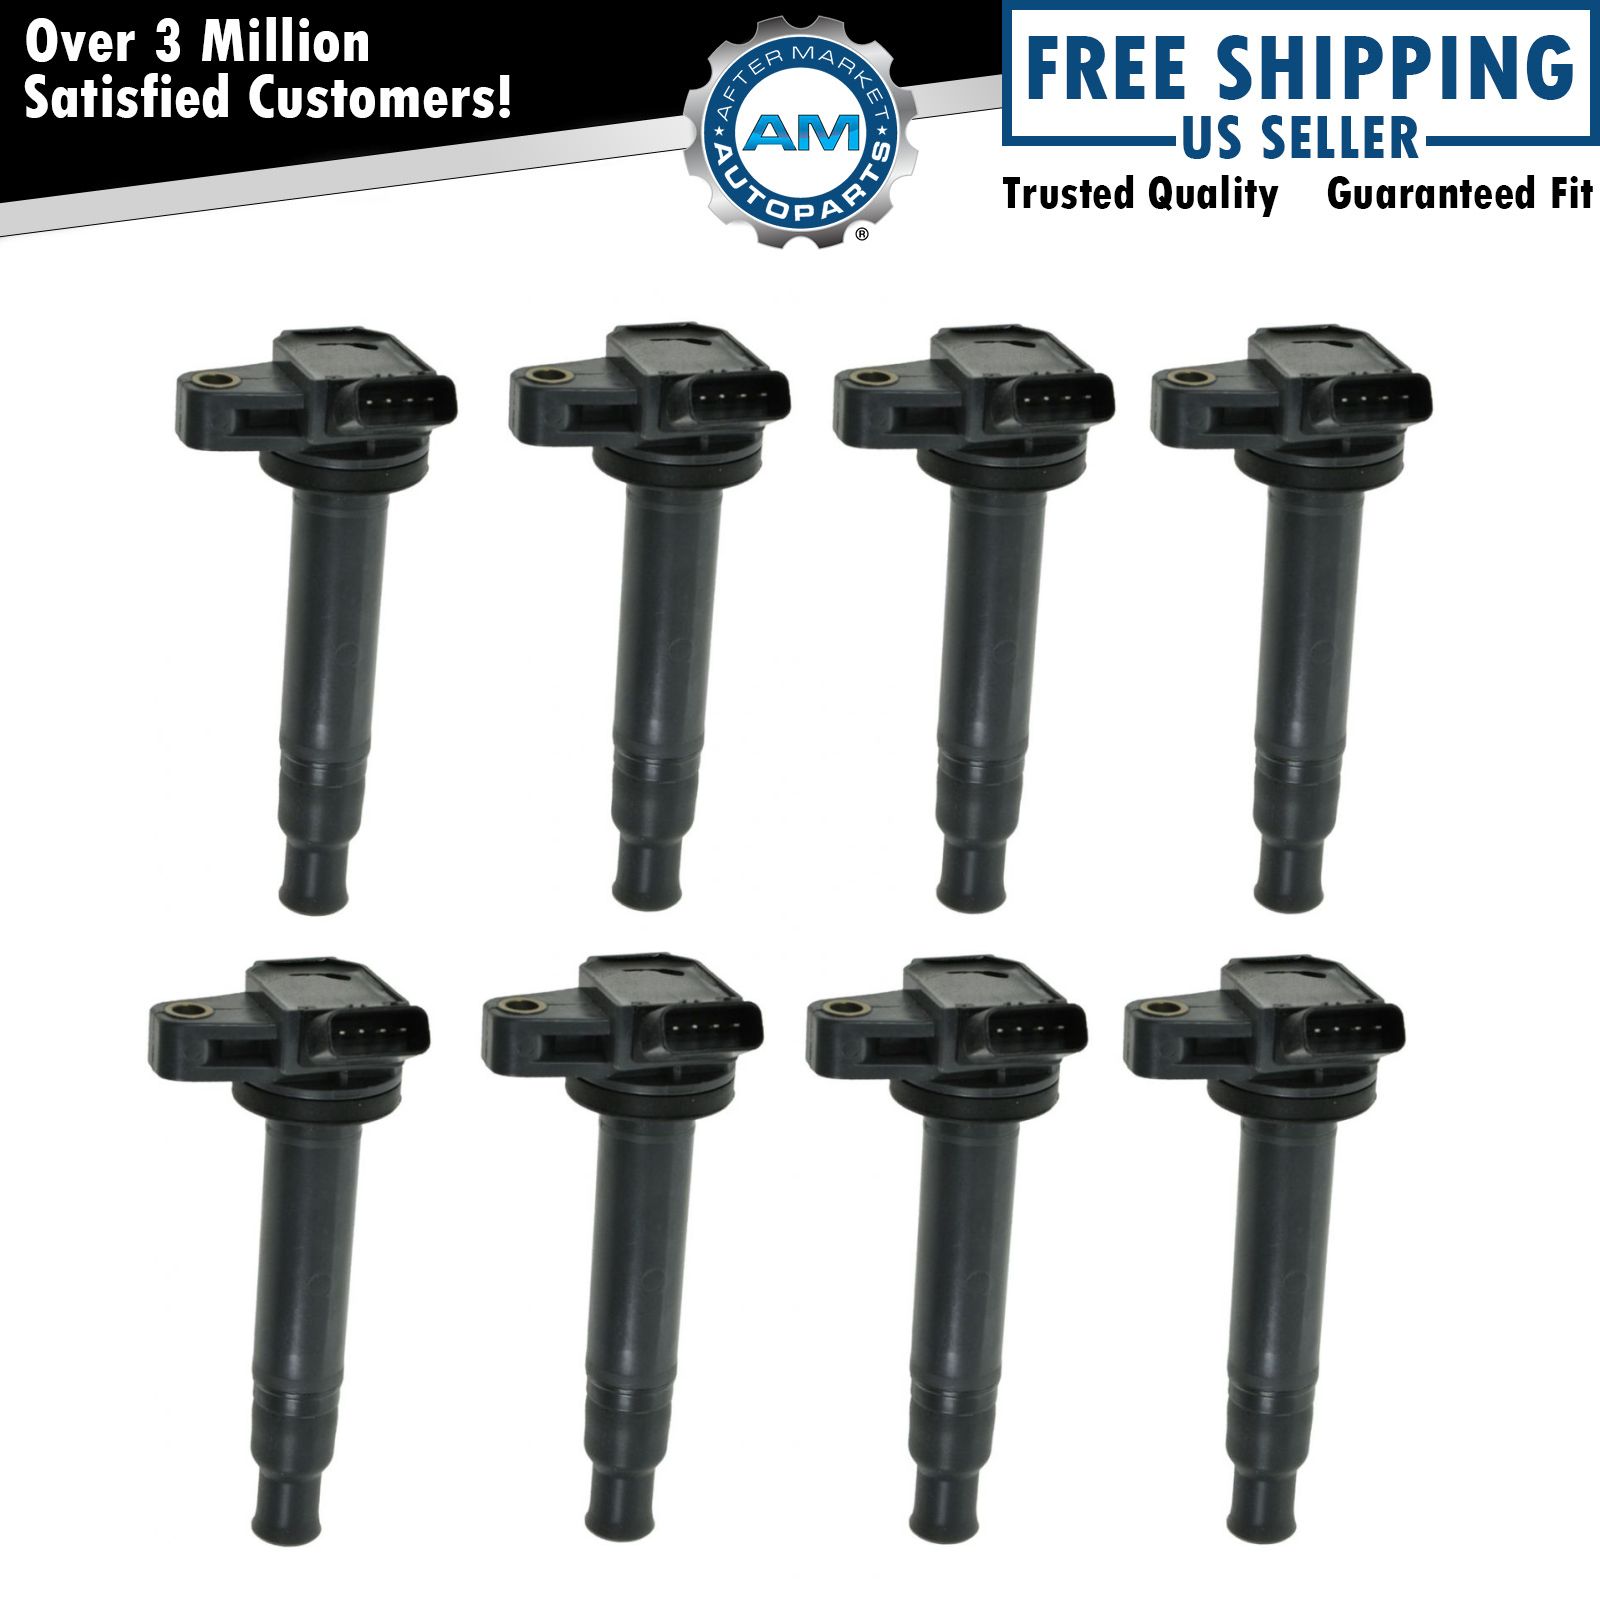 Ignition Coil Pack Kit Set of 8 For Toyota Tundra Pickup Truck Lexus LS GS GX LX